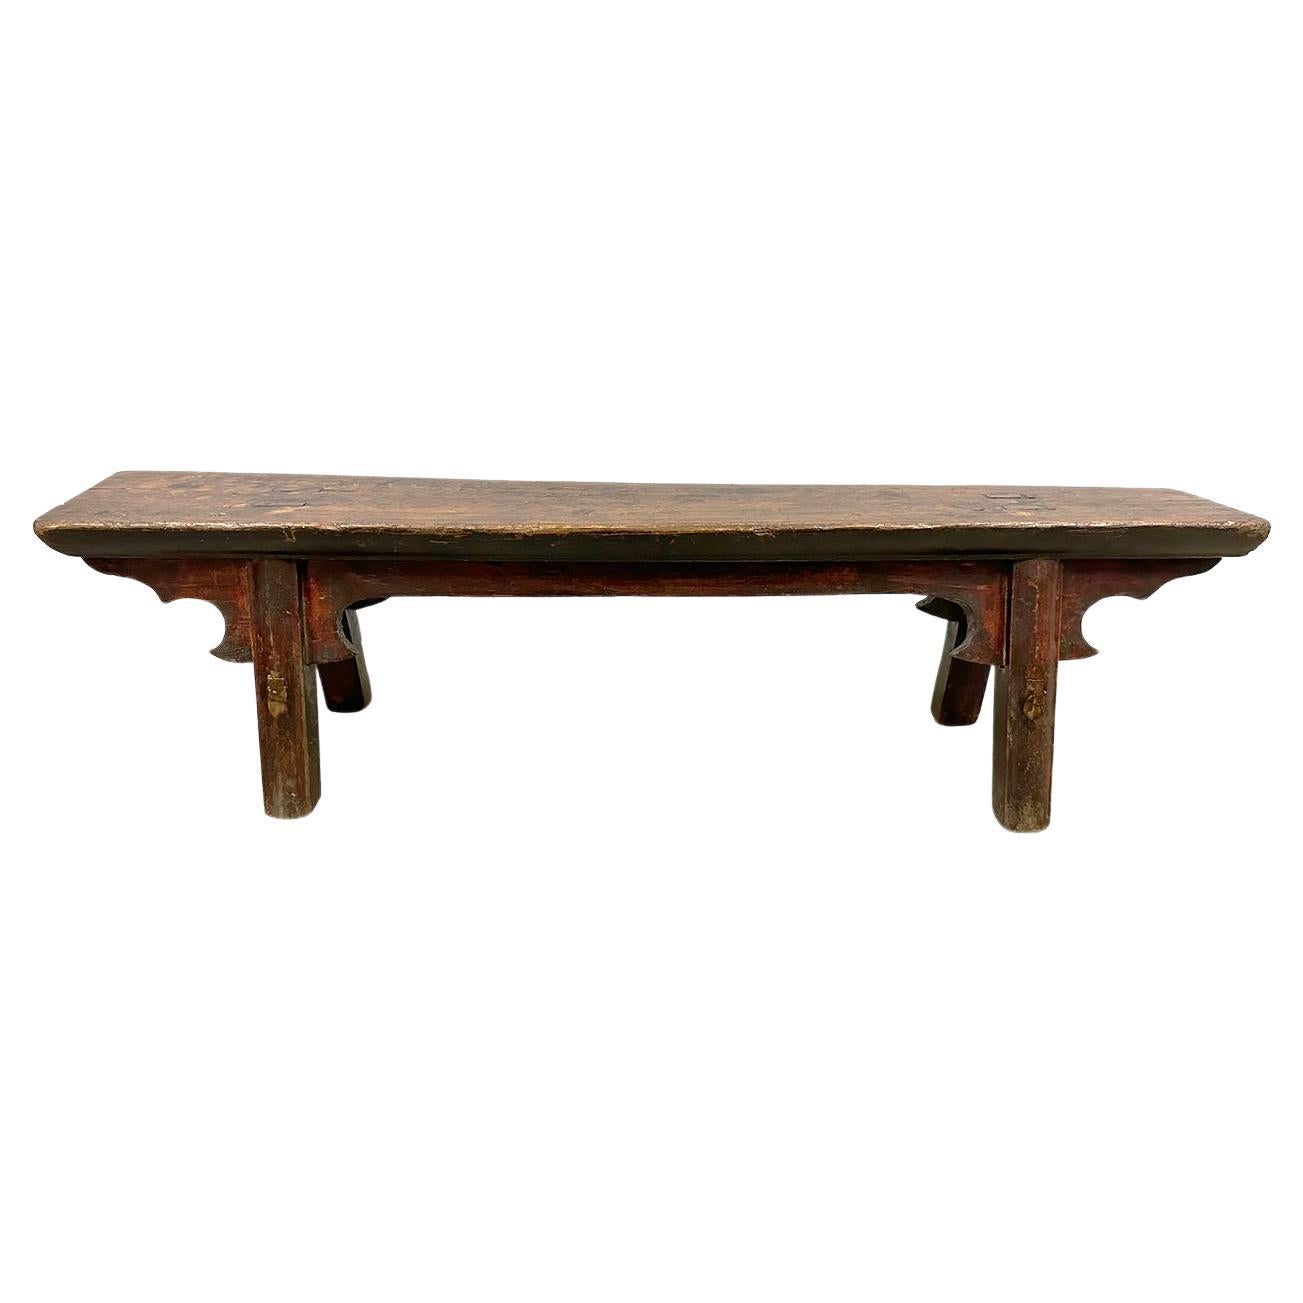 Late 19th Century Antique Chinese Wooden Bench